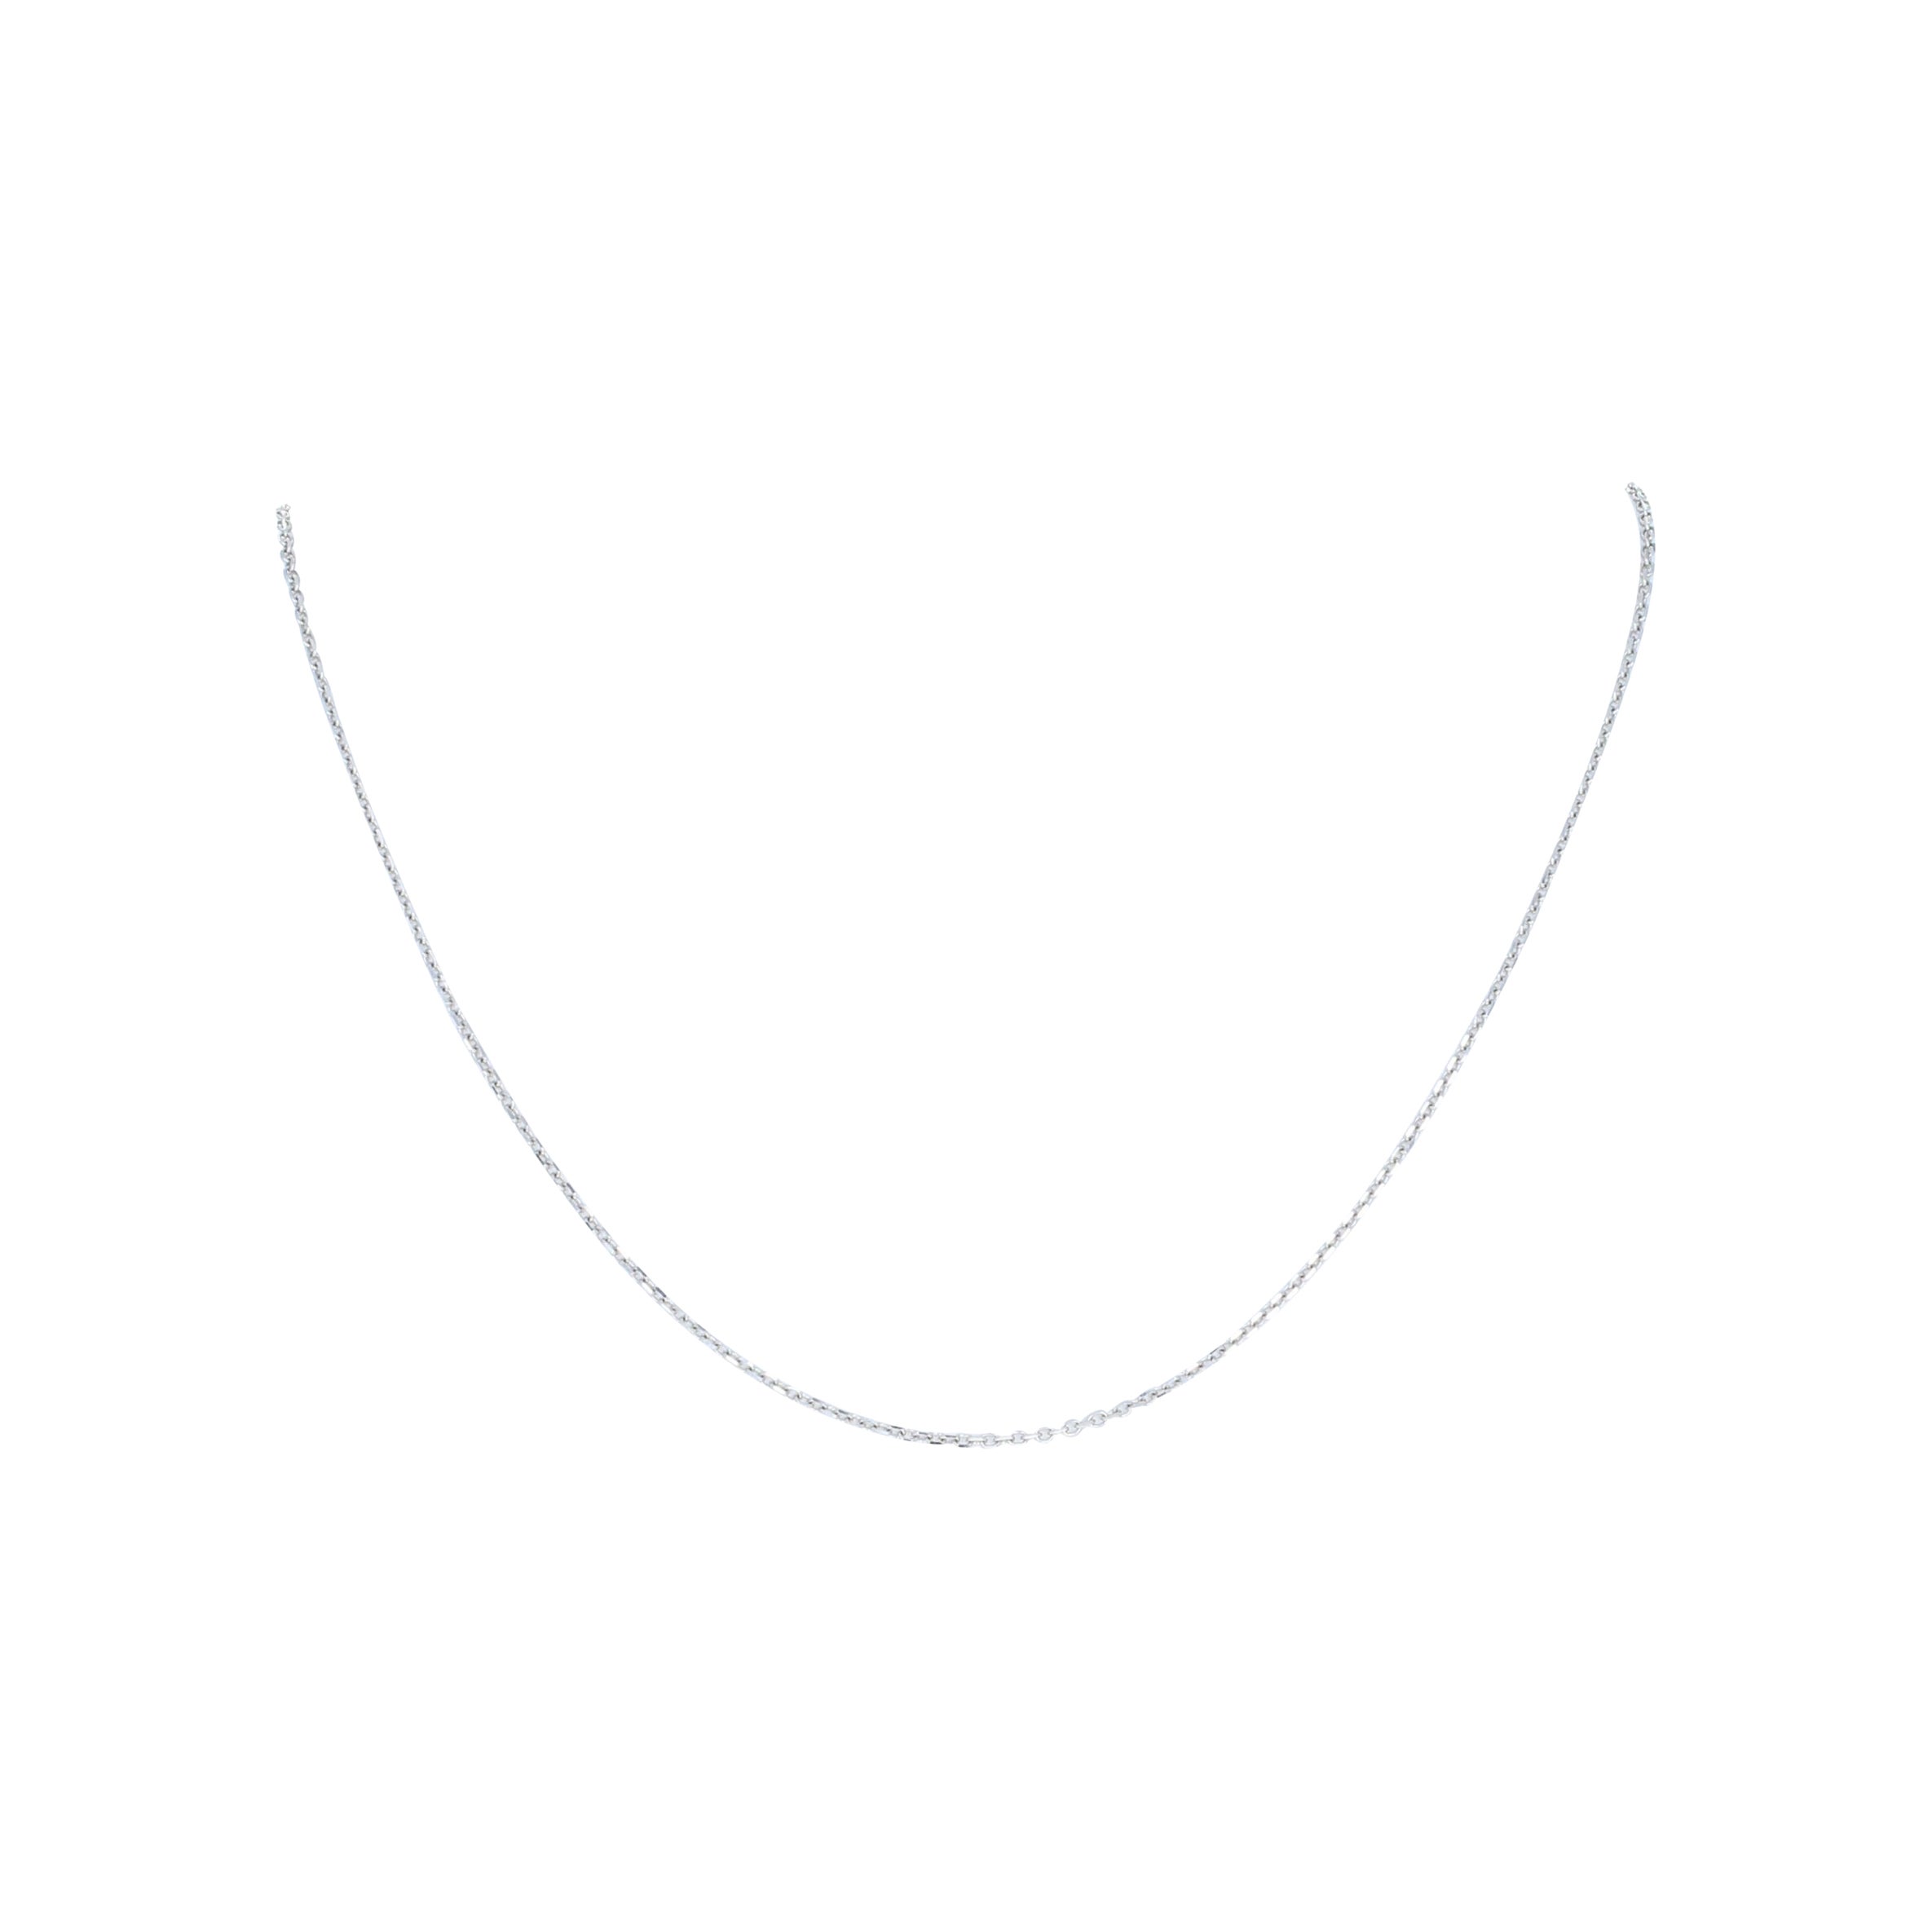 New Women's Diamond Cut Cable Chain Necklace, 14k White Gold For Sale